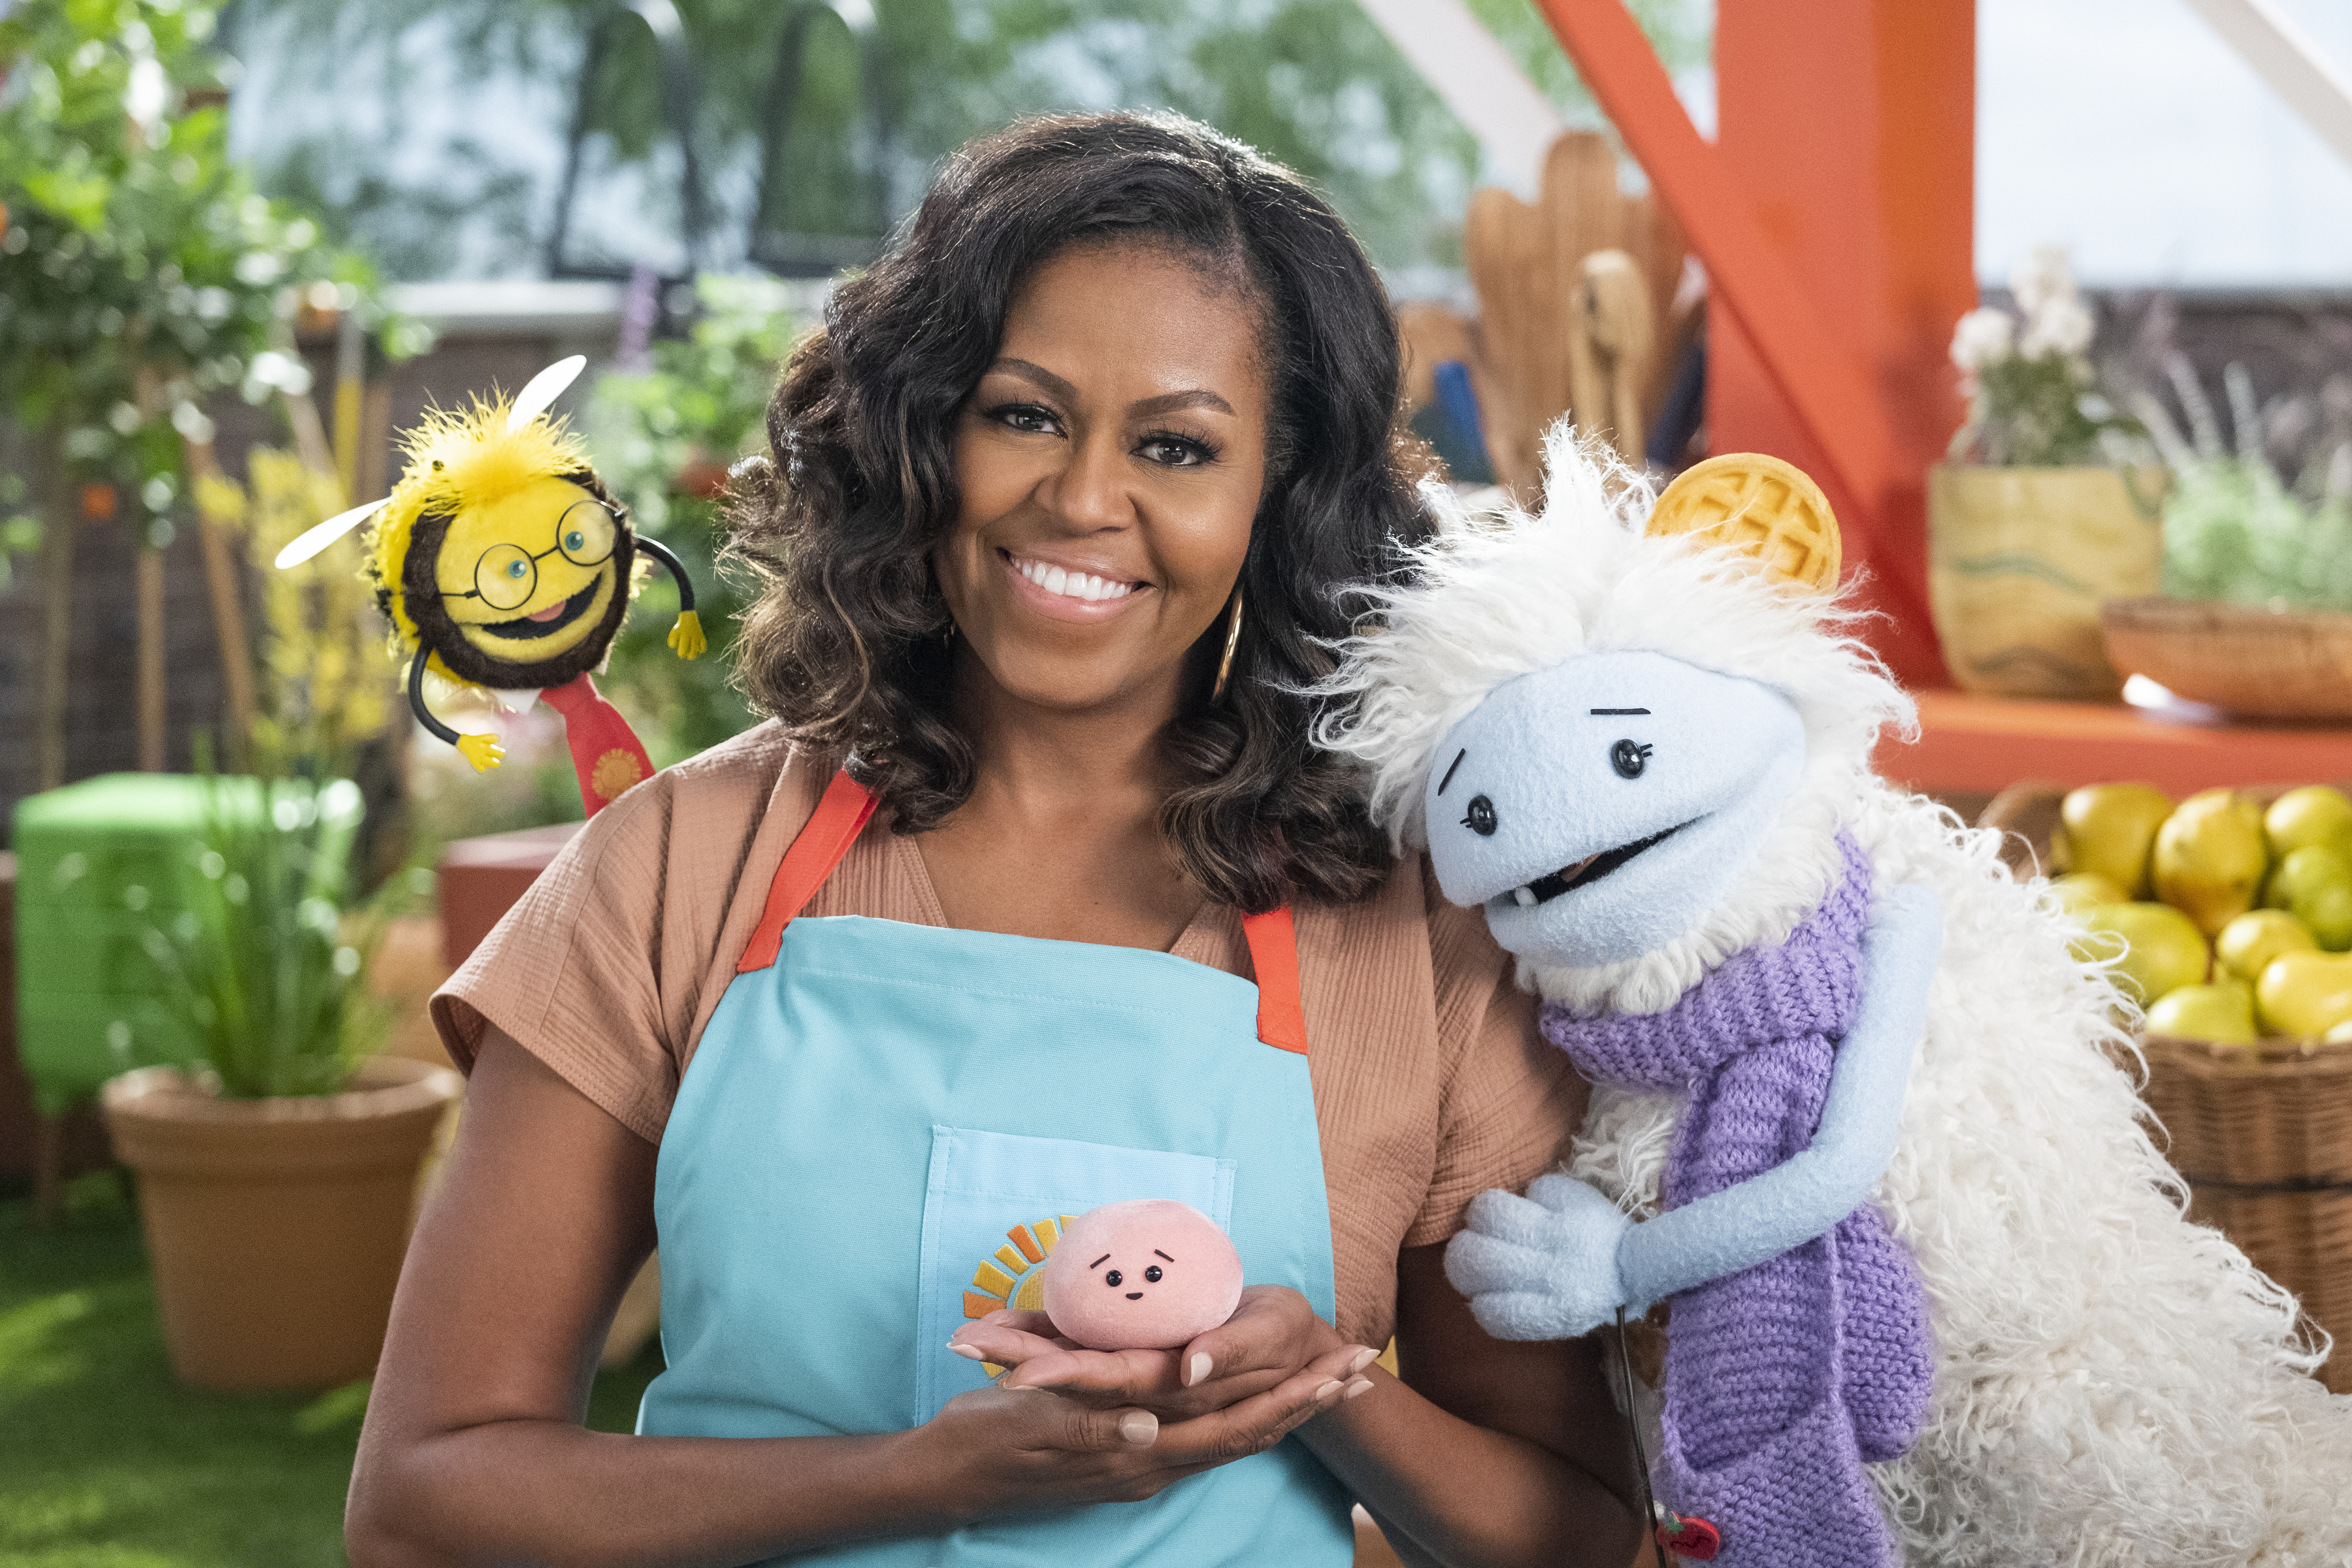 Michelle Obama smiling and holding a mochi stuffie, being hugged by a Muppet-like creature Waffles.